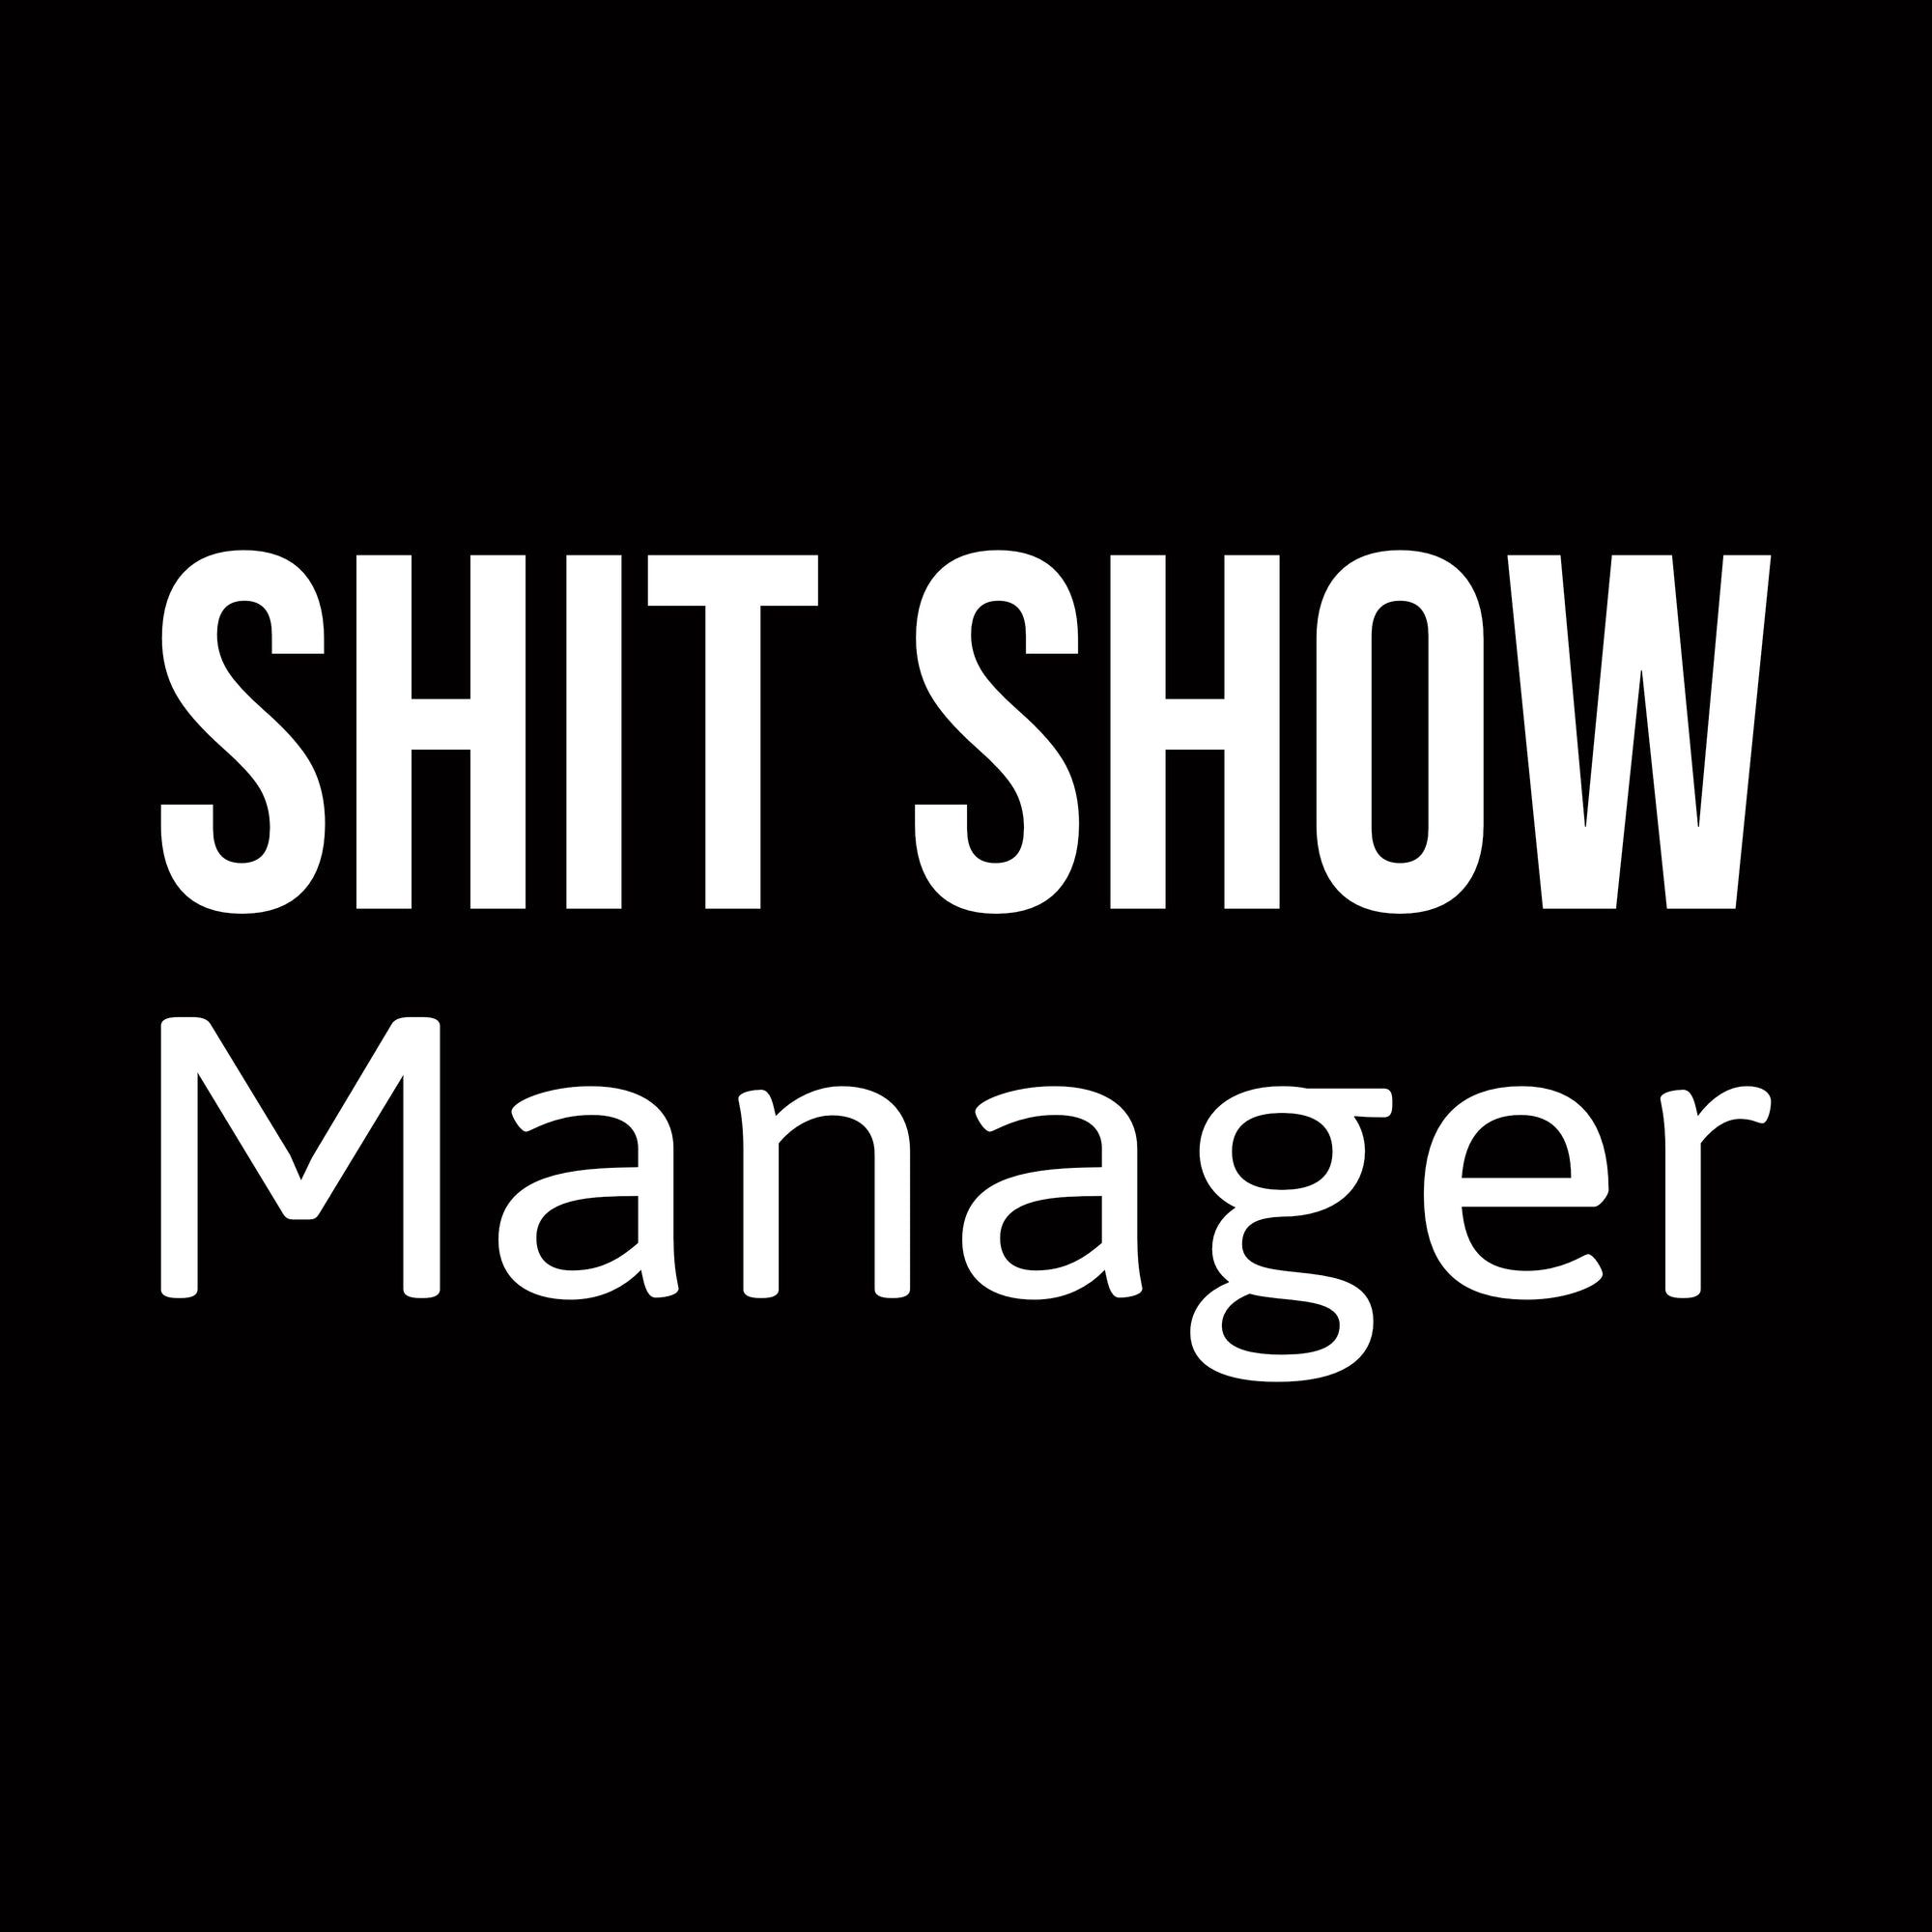 Shit Show Manager Printed T-Shirt-Black